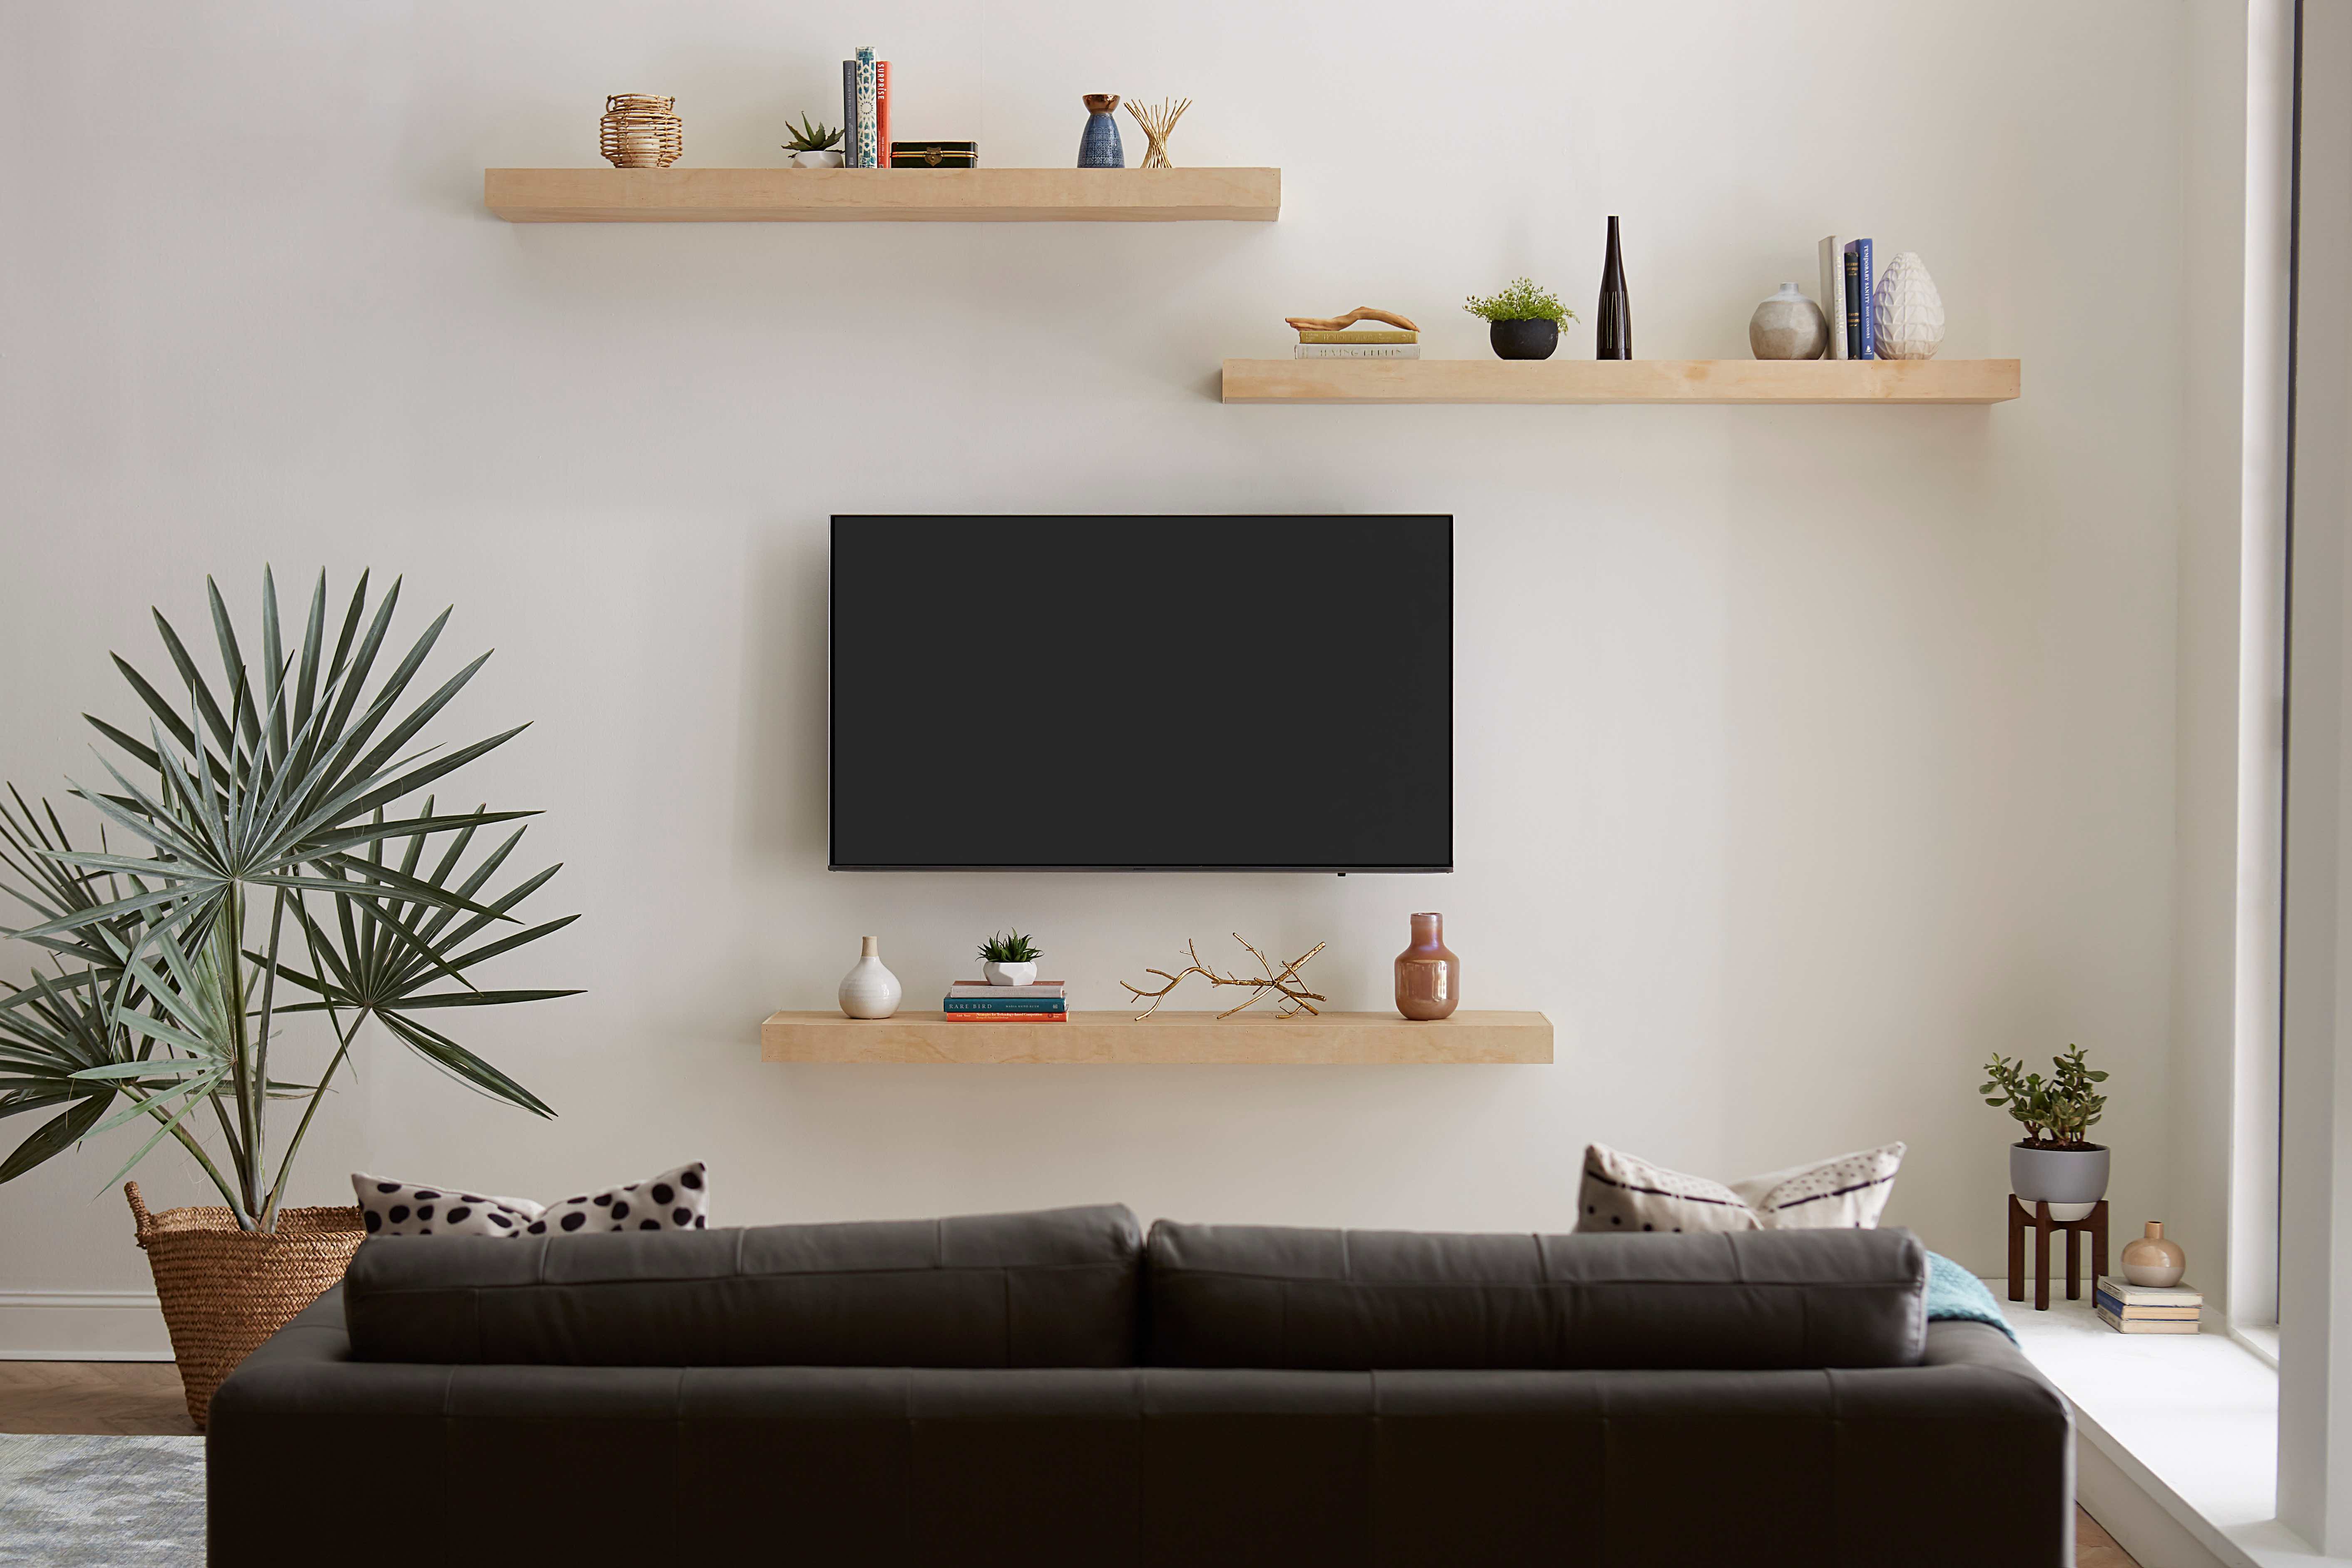 How to Decorate Around Your TV with Floating Shelves